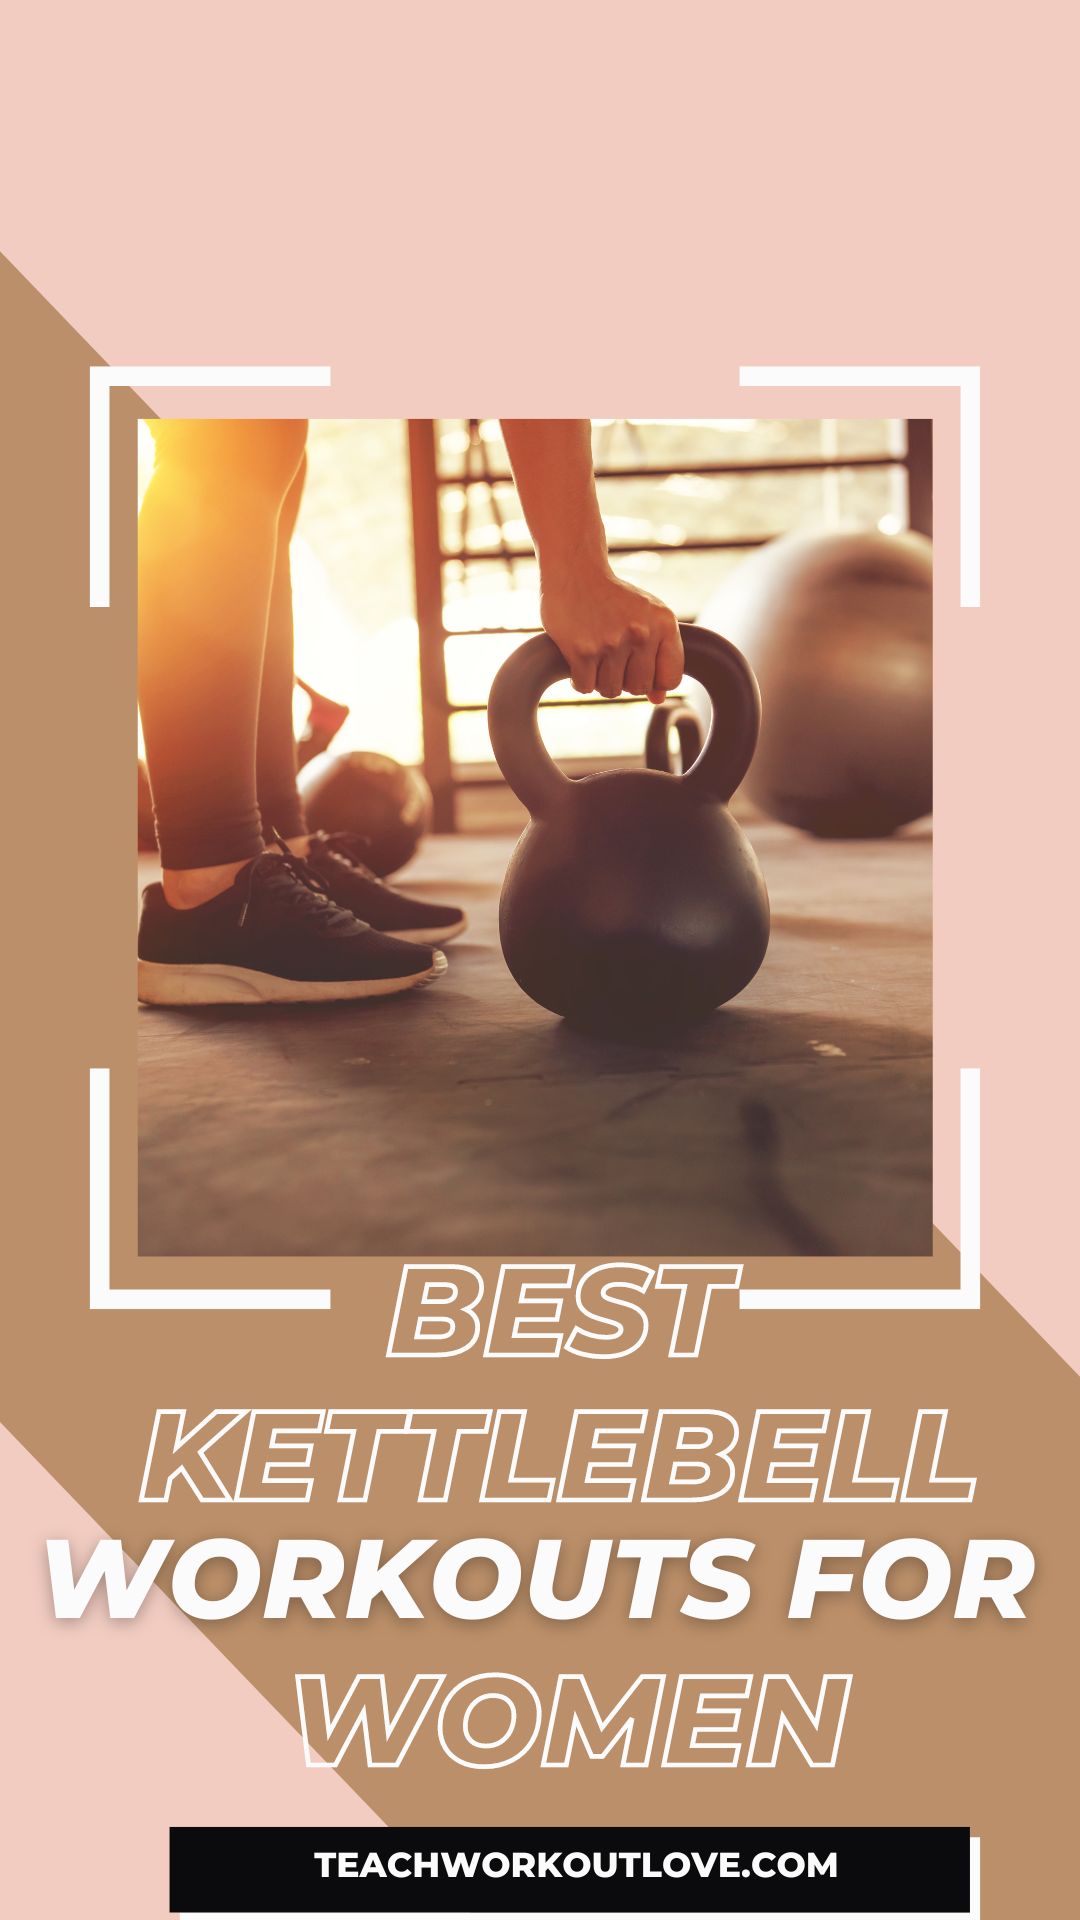 The key to using a kettlebell effectively is to perform movements in accordance with protocol. Here's some easy and doable workout ideas.